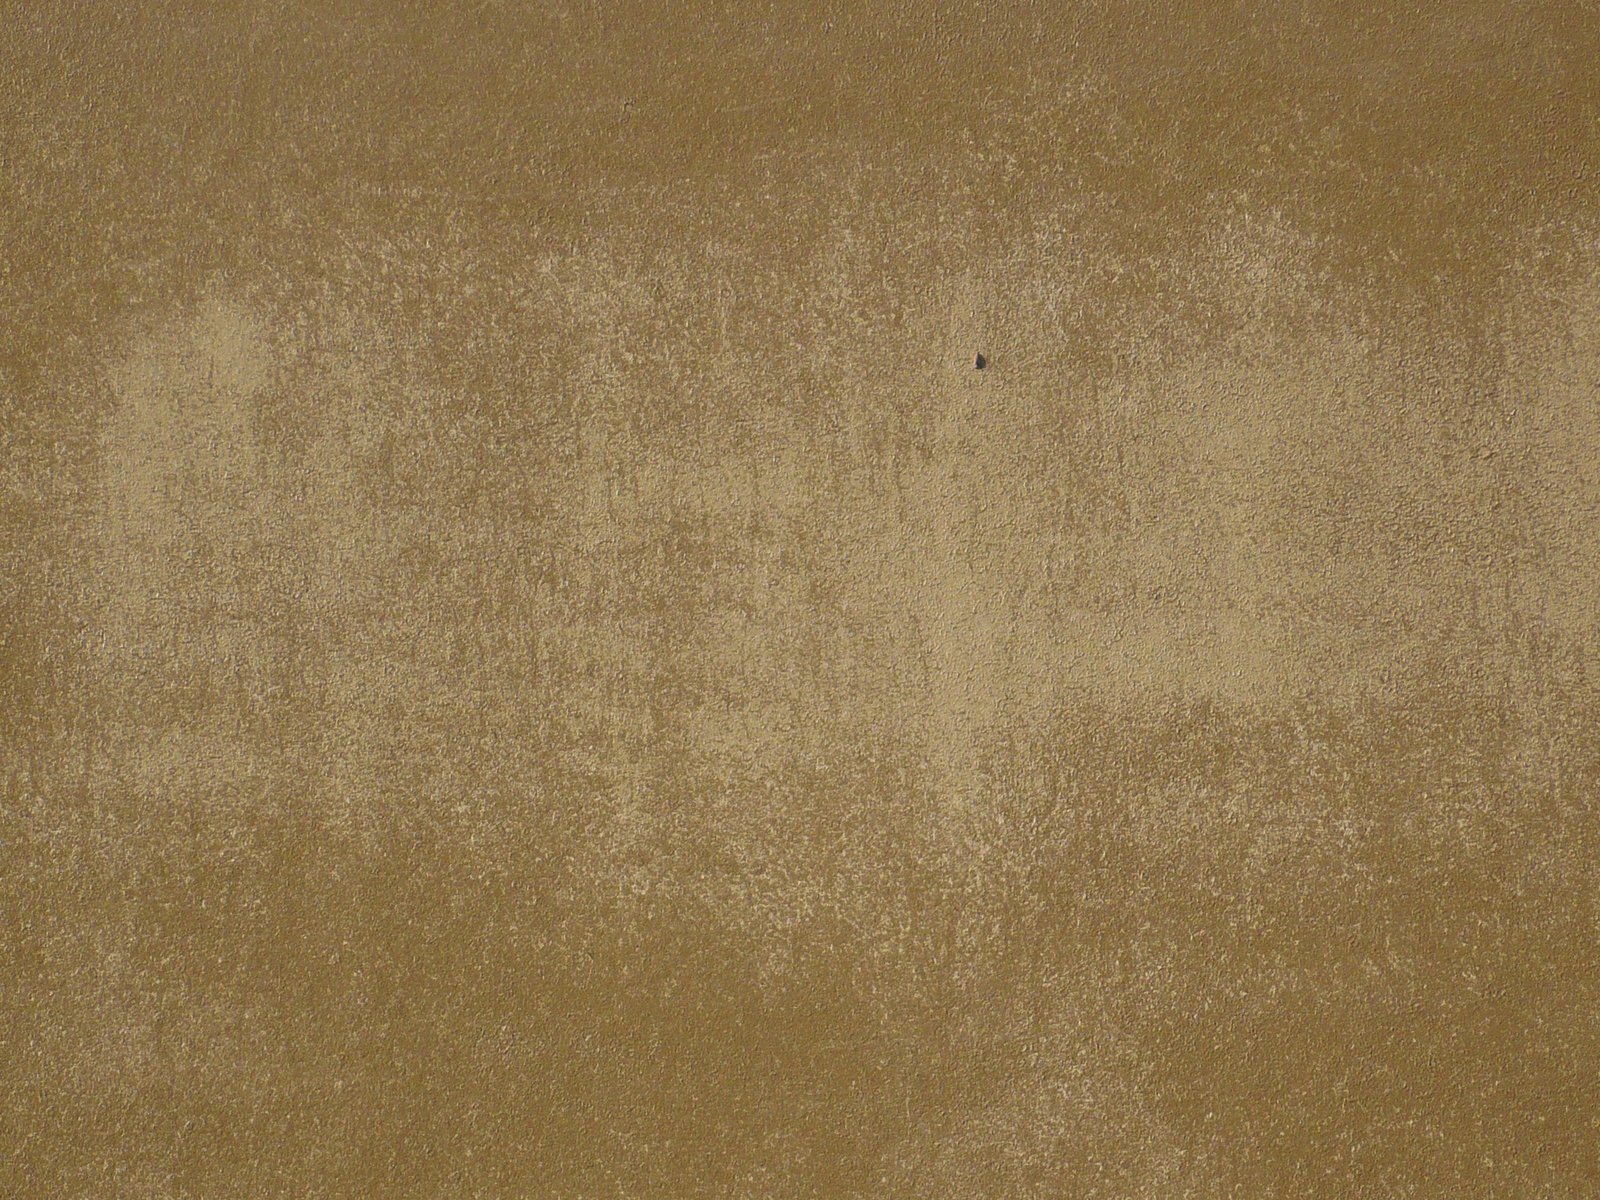 a beige carpet with some stains on it